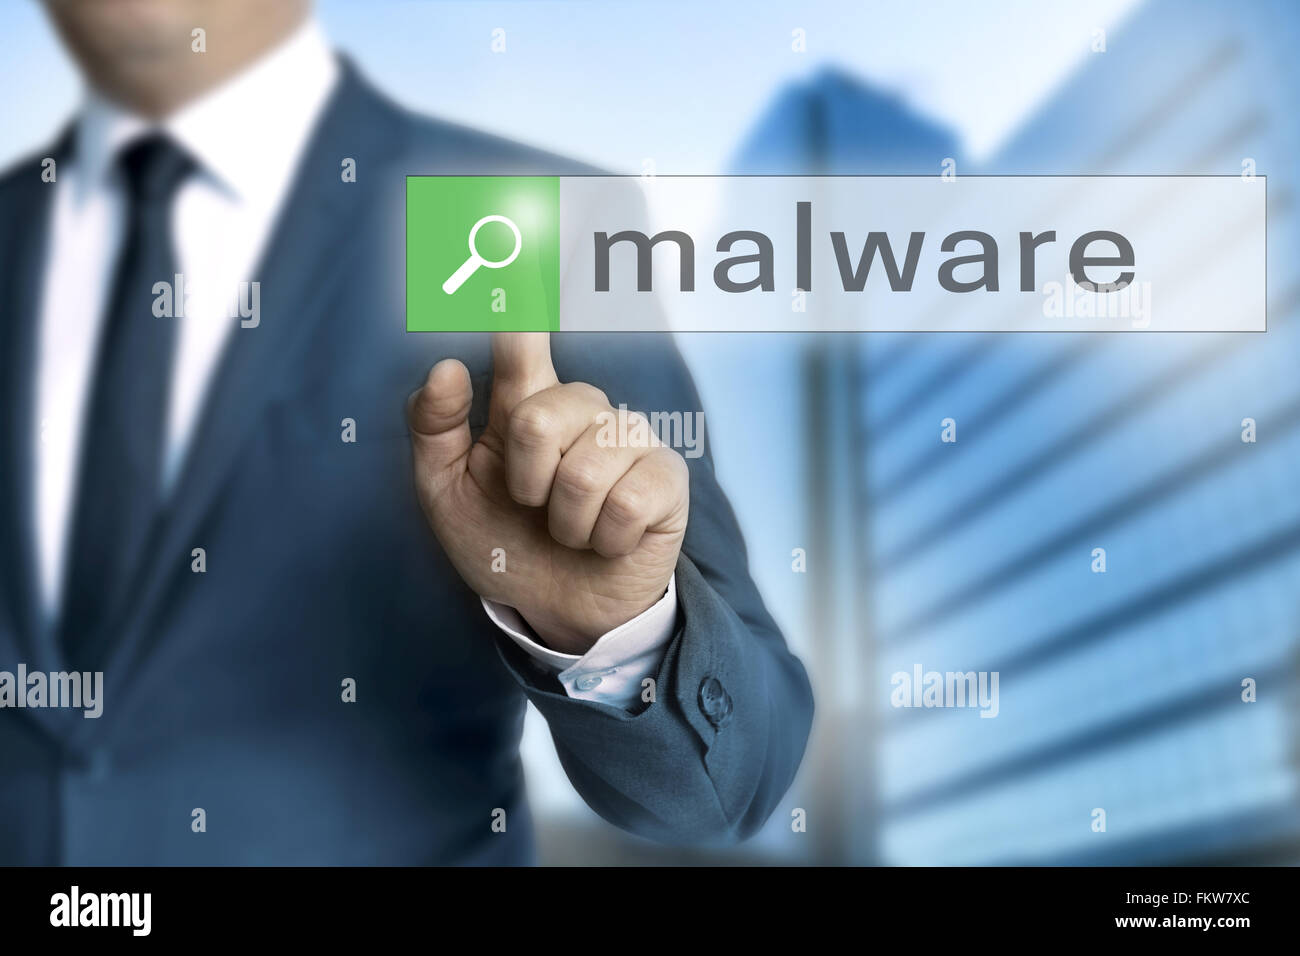 malware browser is operated by businessman. Stock Photo